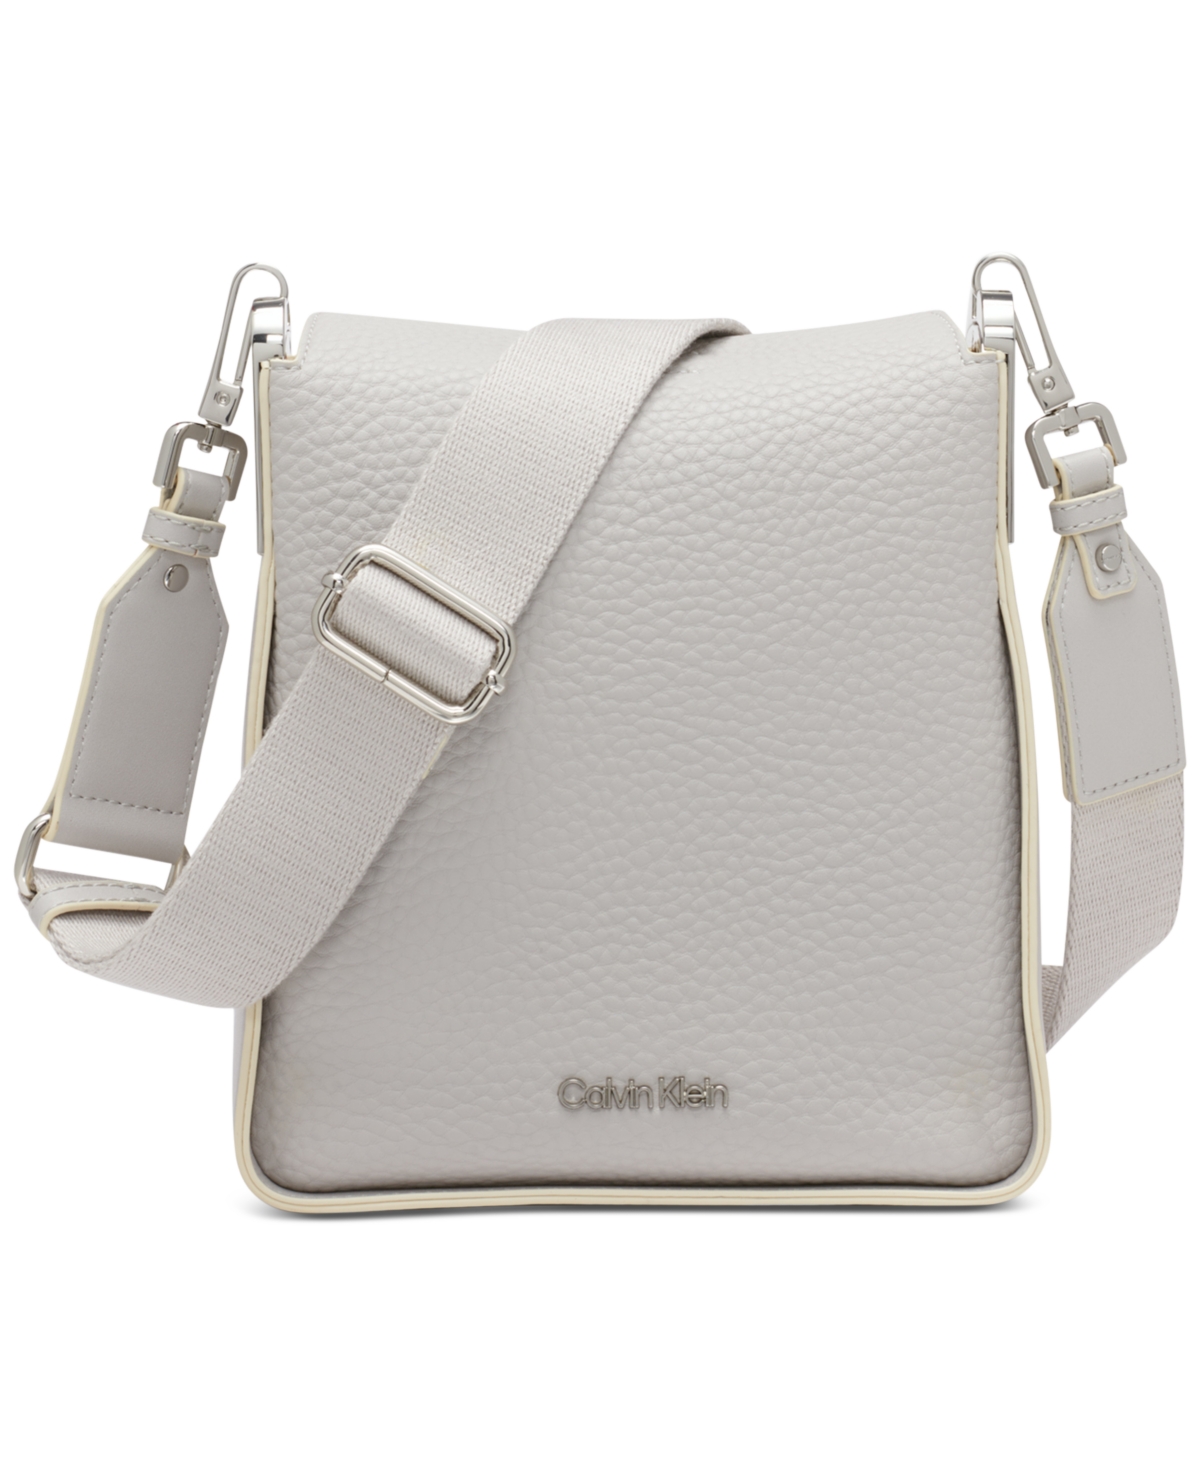 Fay Small Adjustable Crossbody with Magnetic Top Closure - Dove Grey